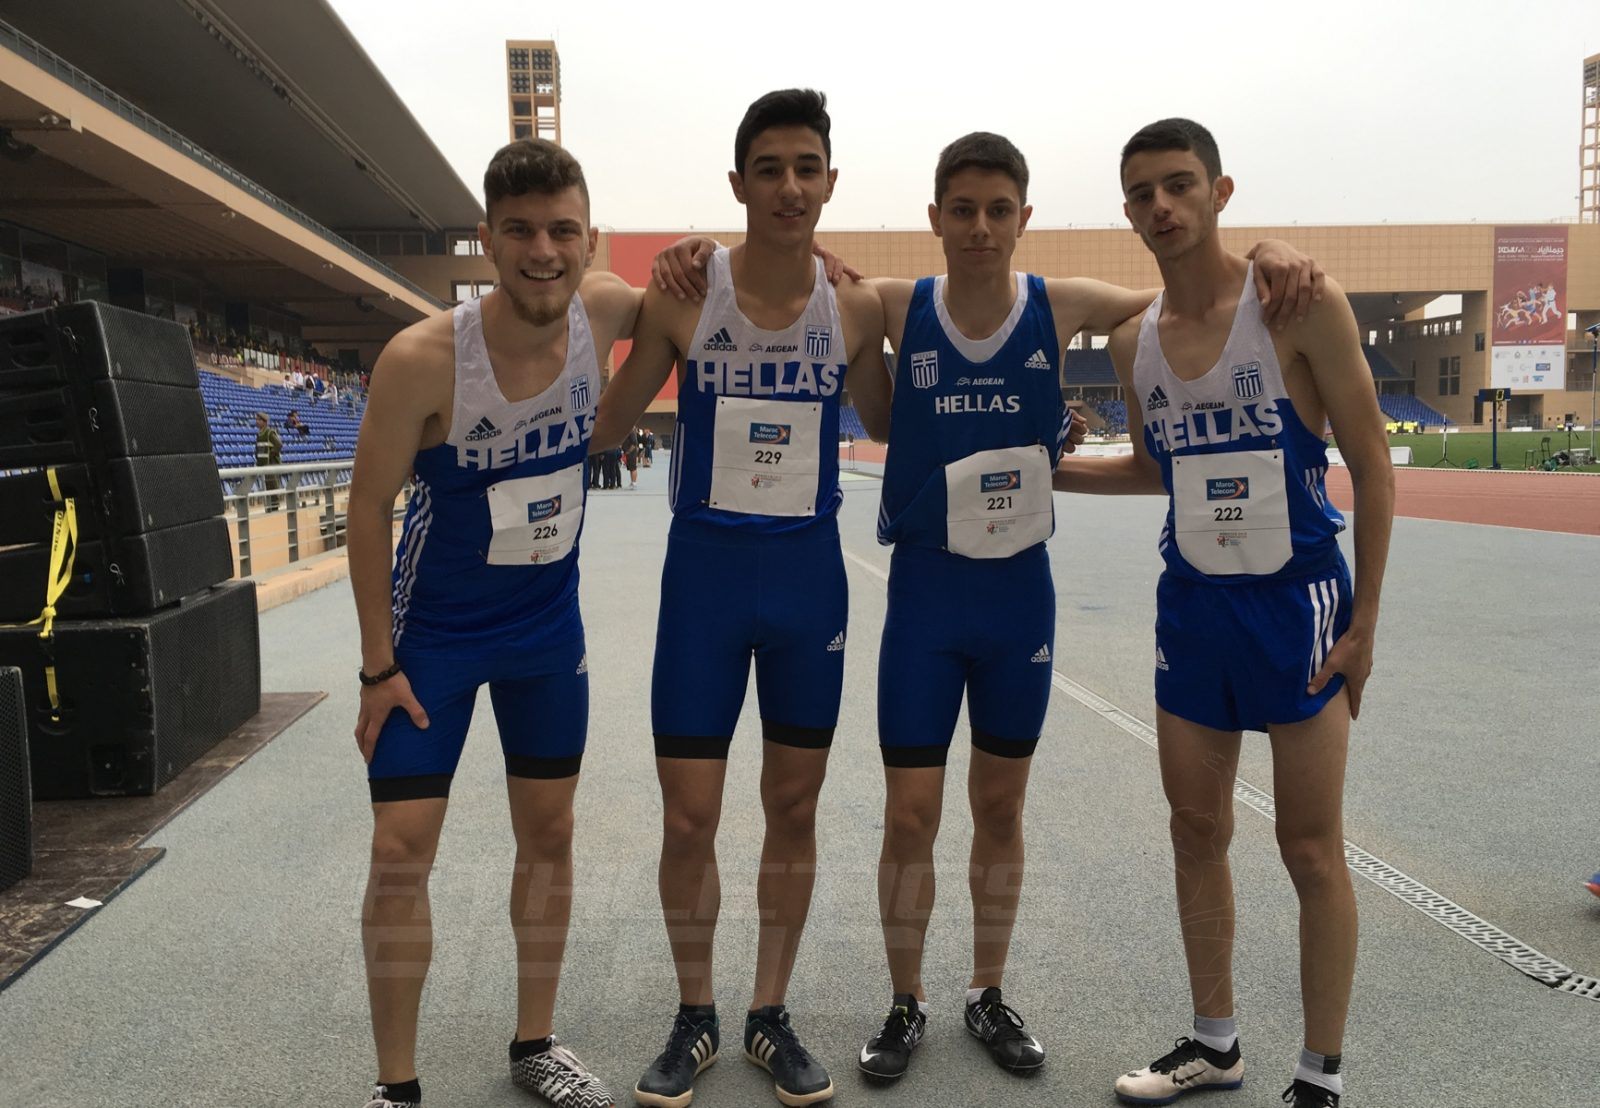 The Greek quartet in the Boys 4x100m final at Gymnasiade 2018 in Marrakech / Photo Credit: Yomi Omogbeja